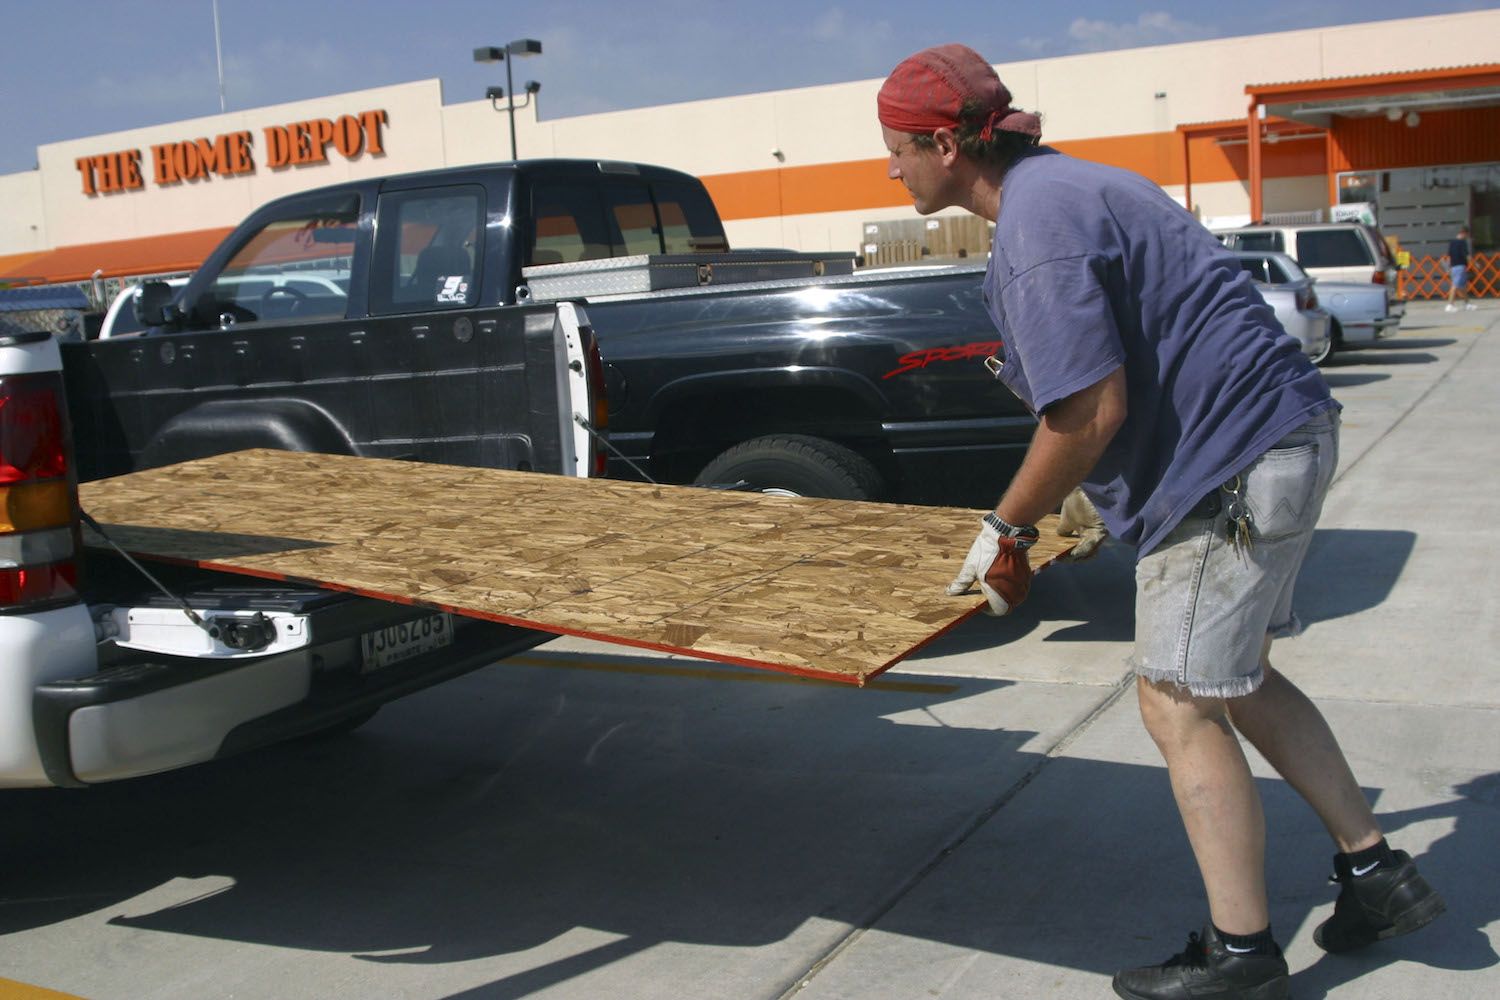 A man slides a sheet of plywood into the bed of a pickup truck, Home Depot visible behind him.